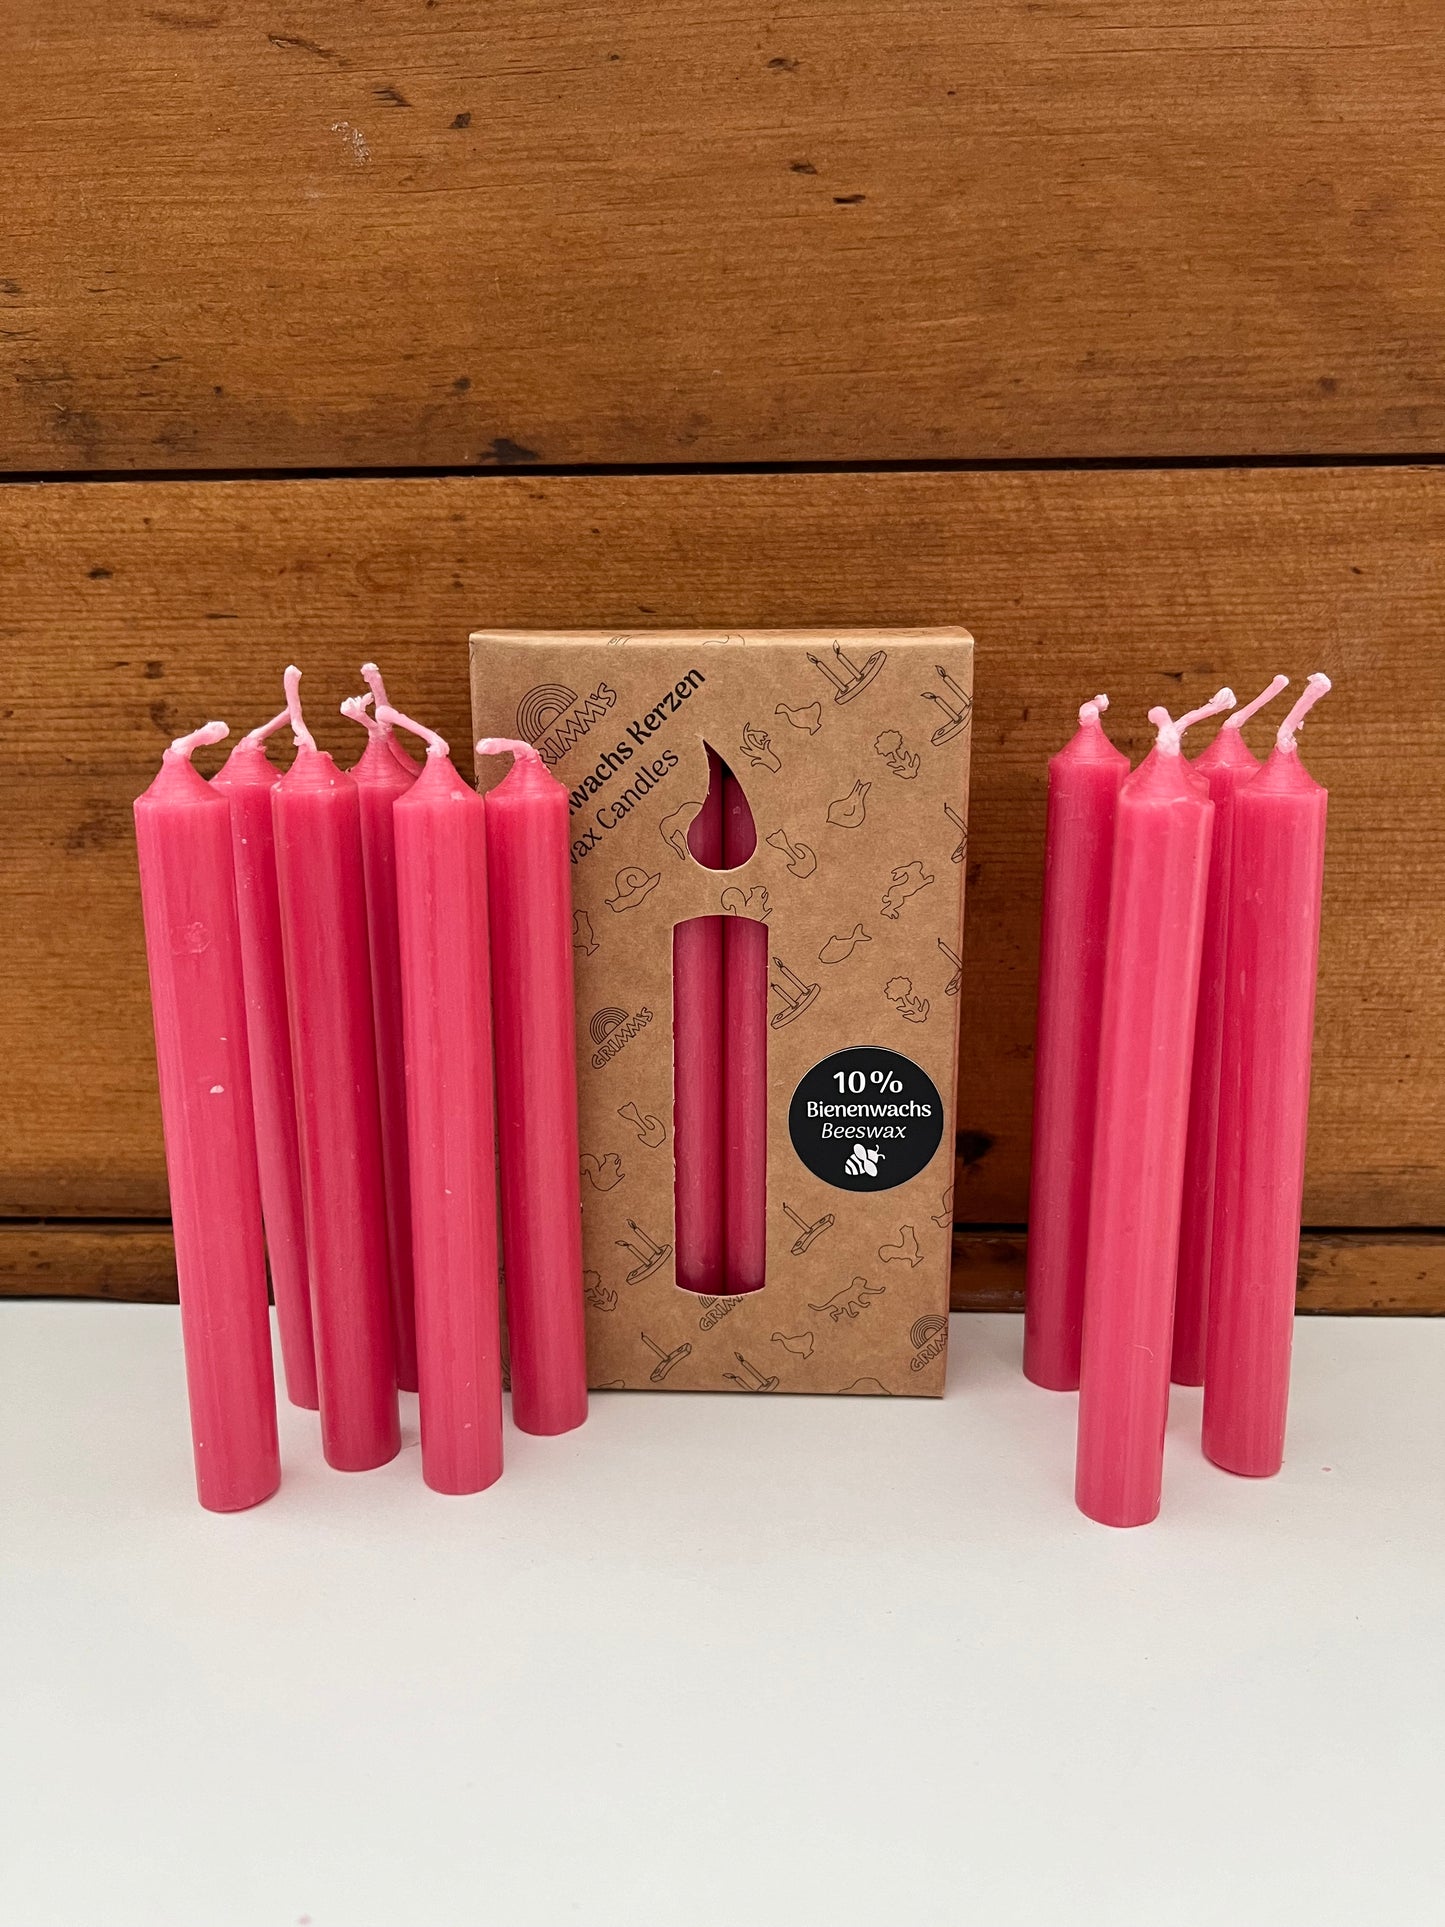 Beeswax Candles - Small ROSE, 12 Candles, 10%Beeswax and Sticky Wax!